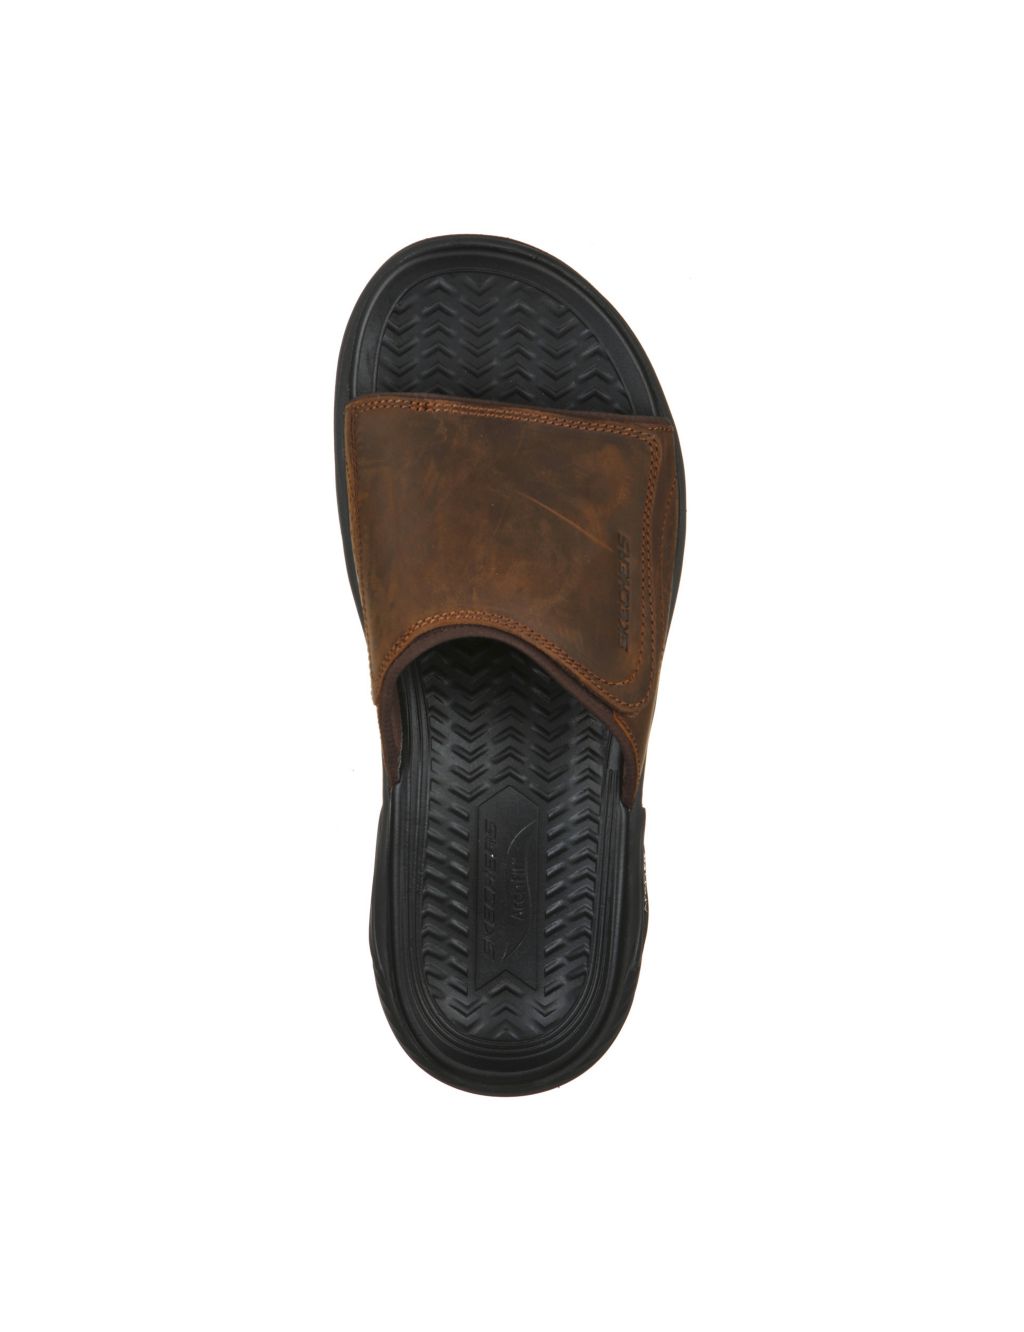 Arch Fit Motley Revelo Leather Sliders image 3